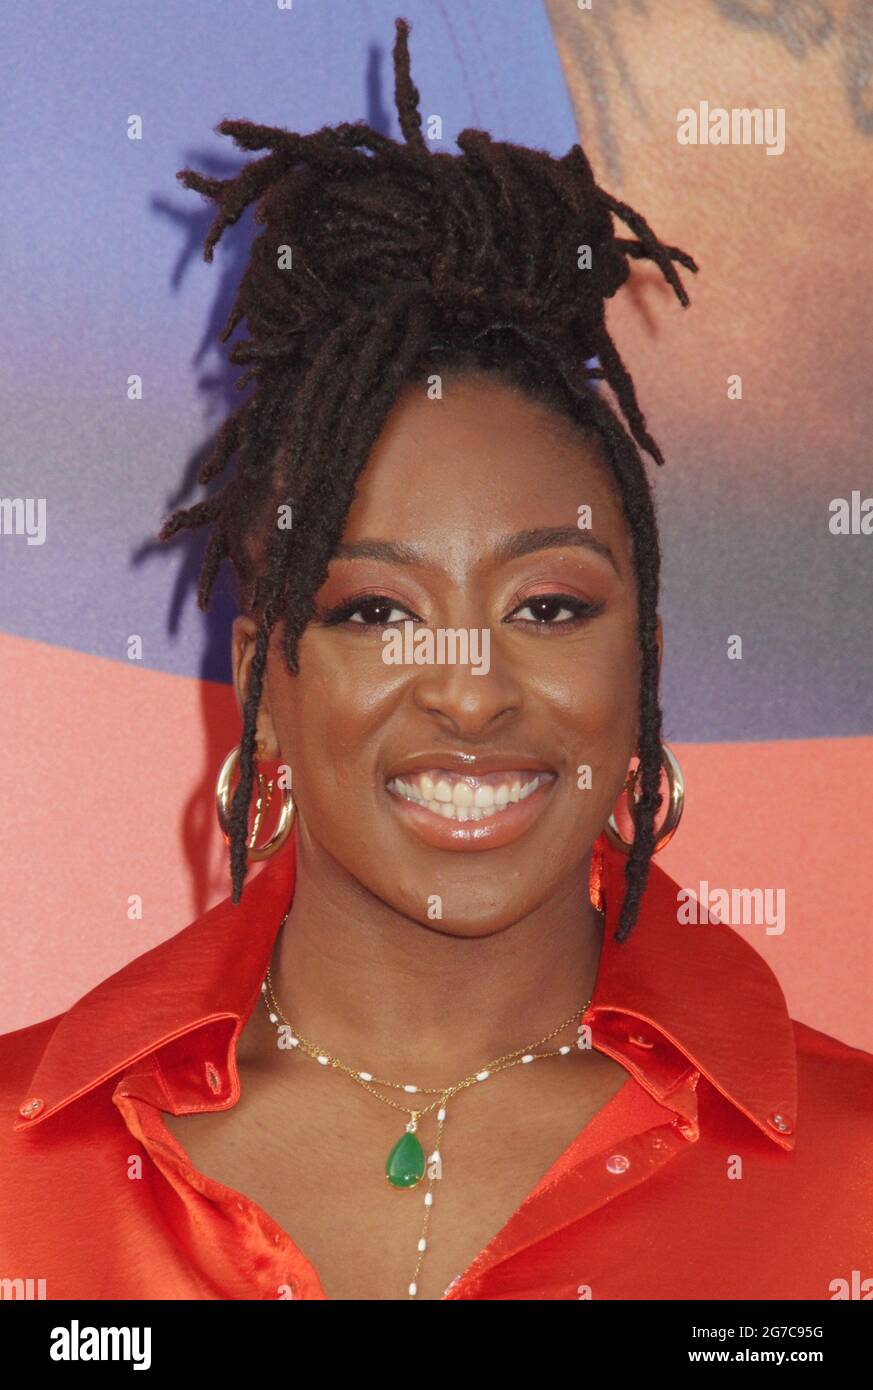 Los Angeles, California, USA. 12th July, 2021. Nneka Ogwumike 07/12/2021 The World Premiere of “Space Jam: A New Legacy” held at the L.A. Live Regal Cinemas in Los Angeles, CA Photo by Izumi Hasegawa/HollywoodNewsWire.net Credit: Hollywood News Wire Inc./Alamy Live News Stock Photo